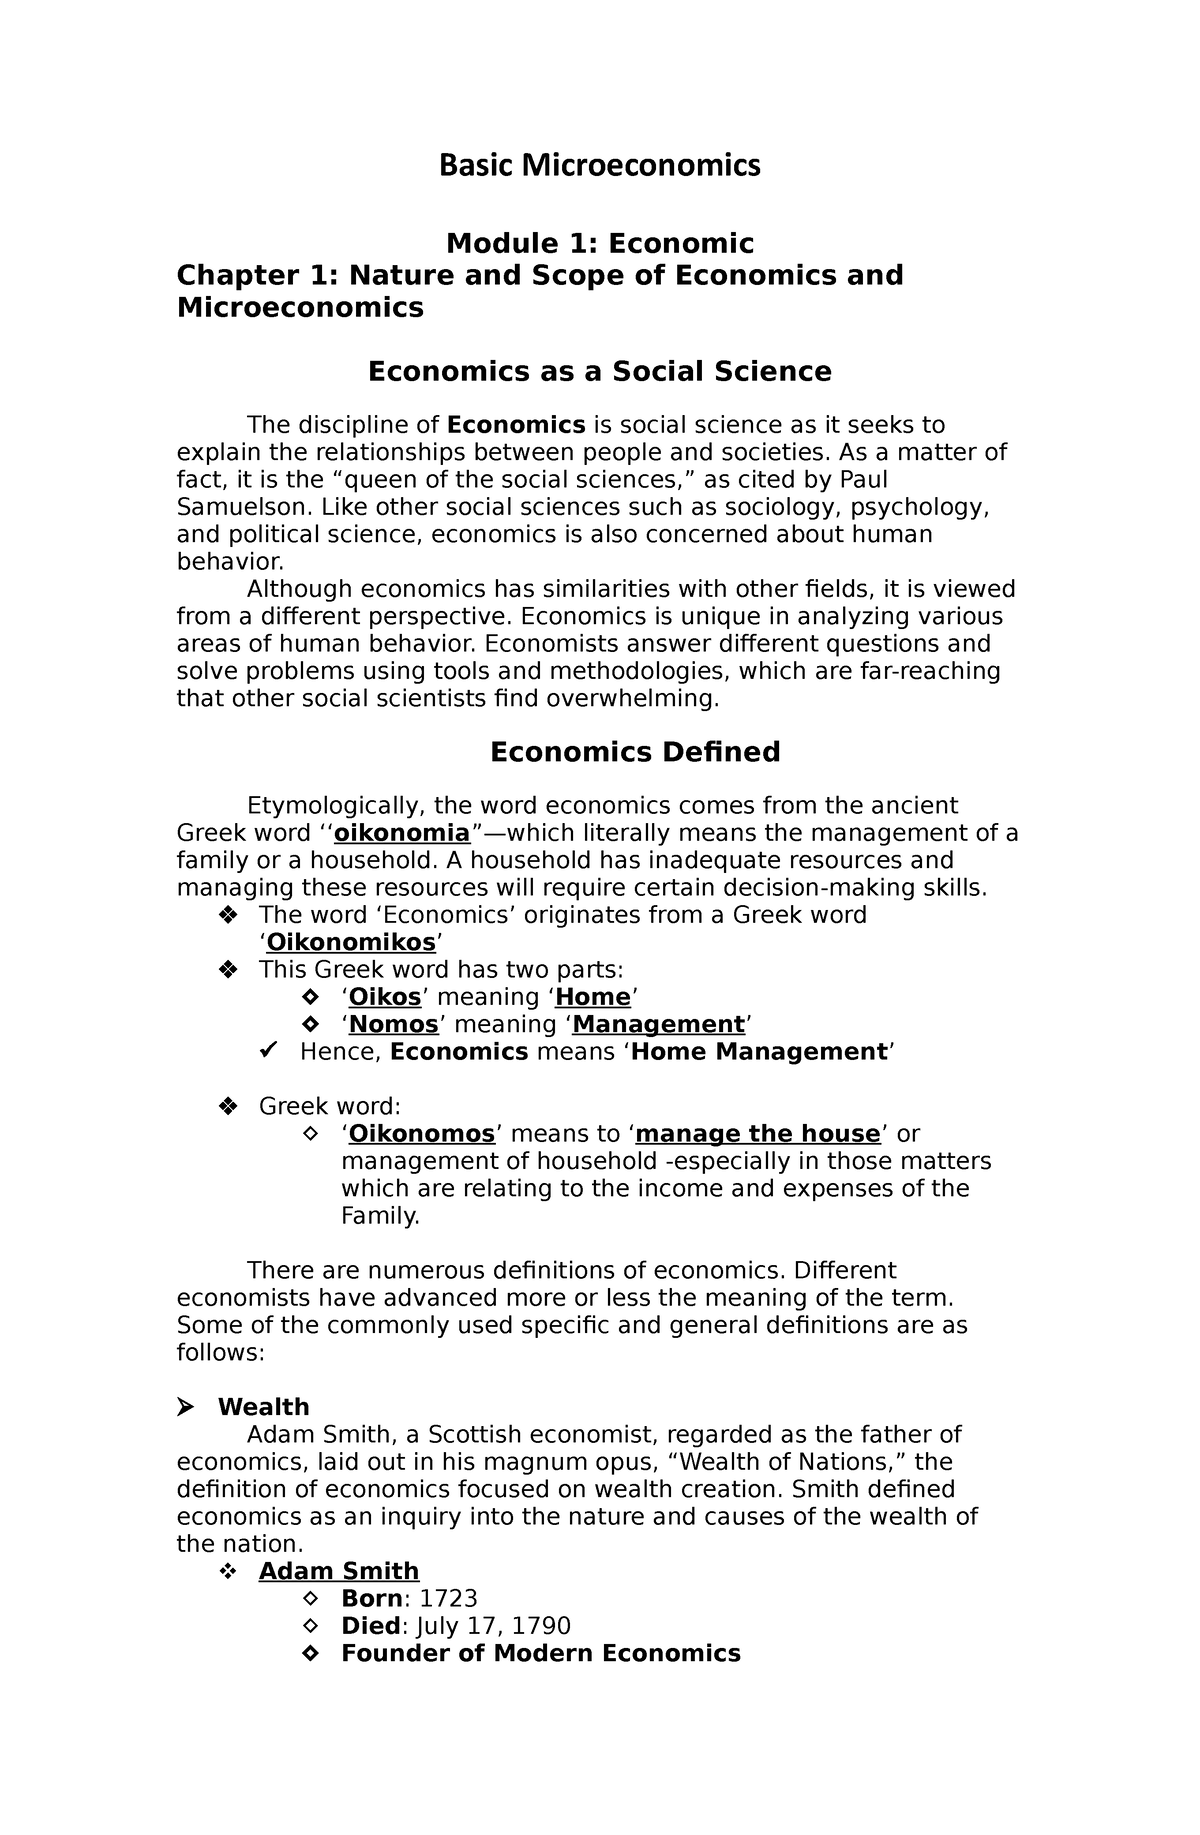 microeconomics research papers pdf